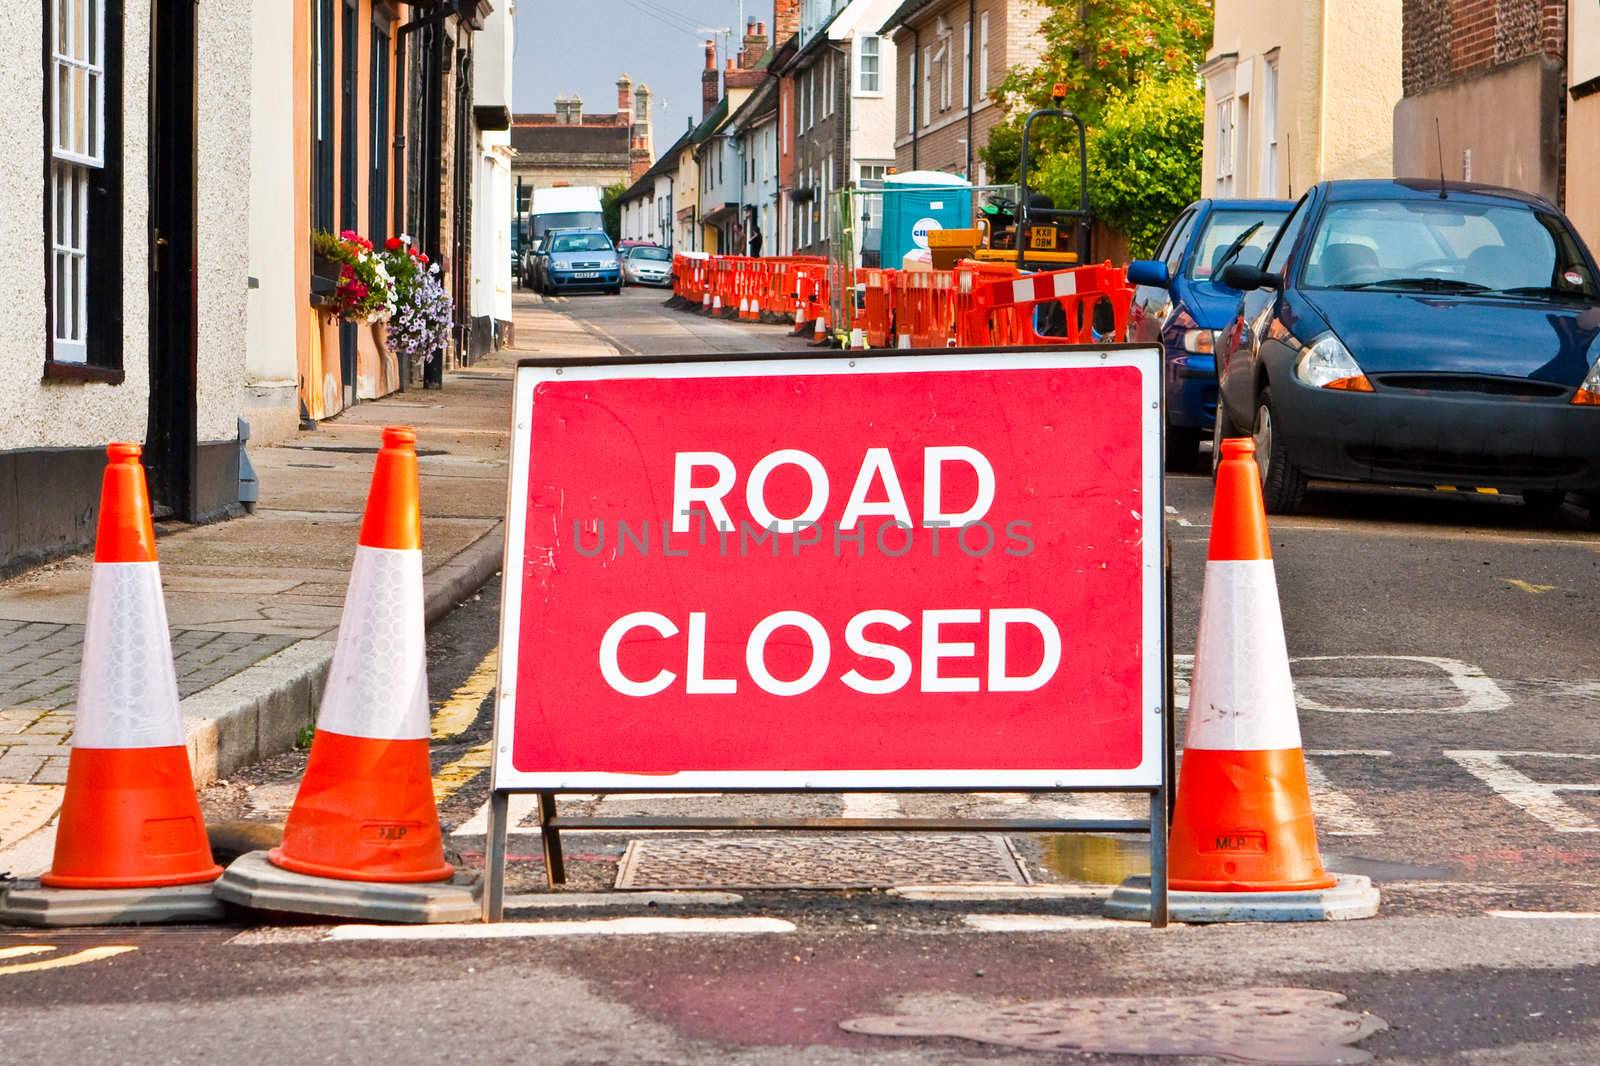 A sign indicating a closed road with traffic cones in an english town